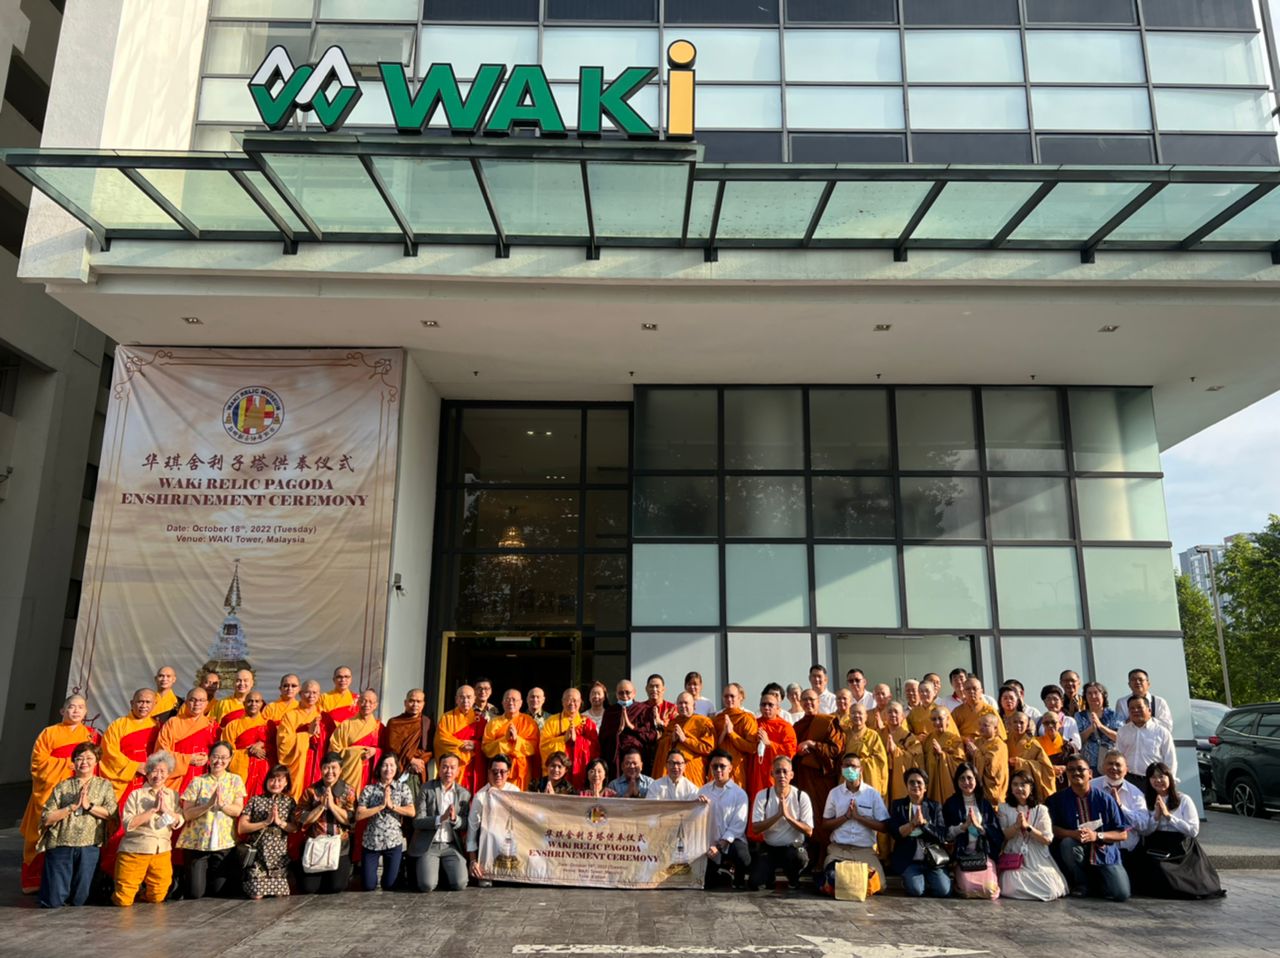 《Waki Relic Musuem Malaysia presented 51 units of the Buddha and his disciple’s relics in the Waki Relic Pagoda For Enshrinement》